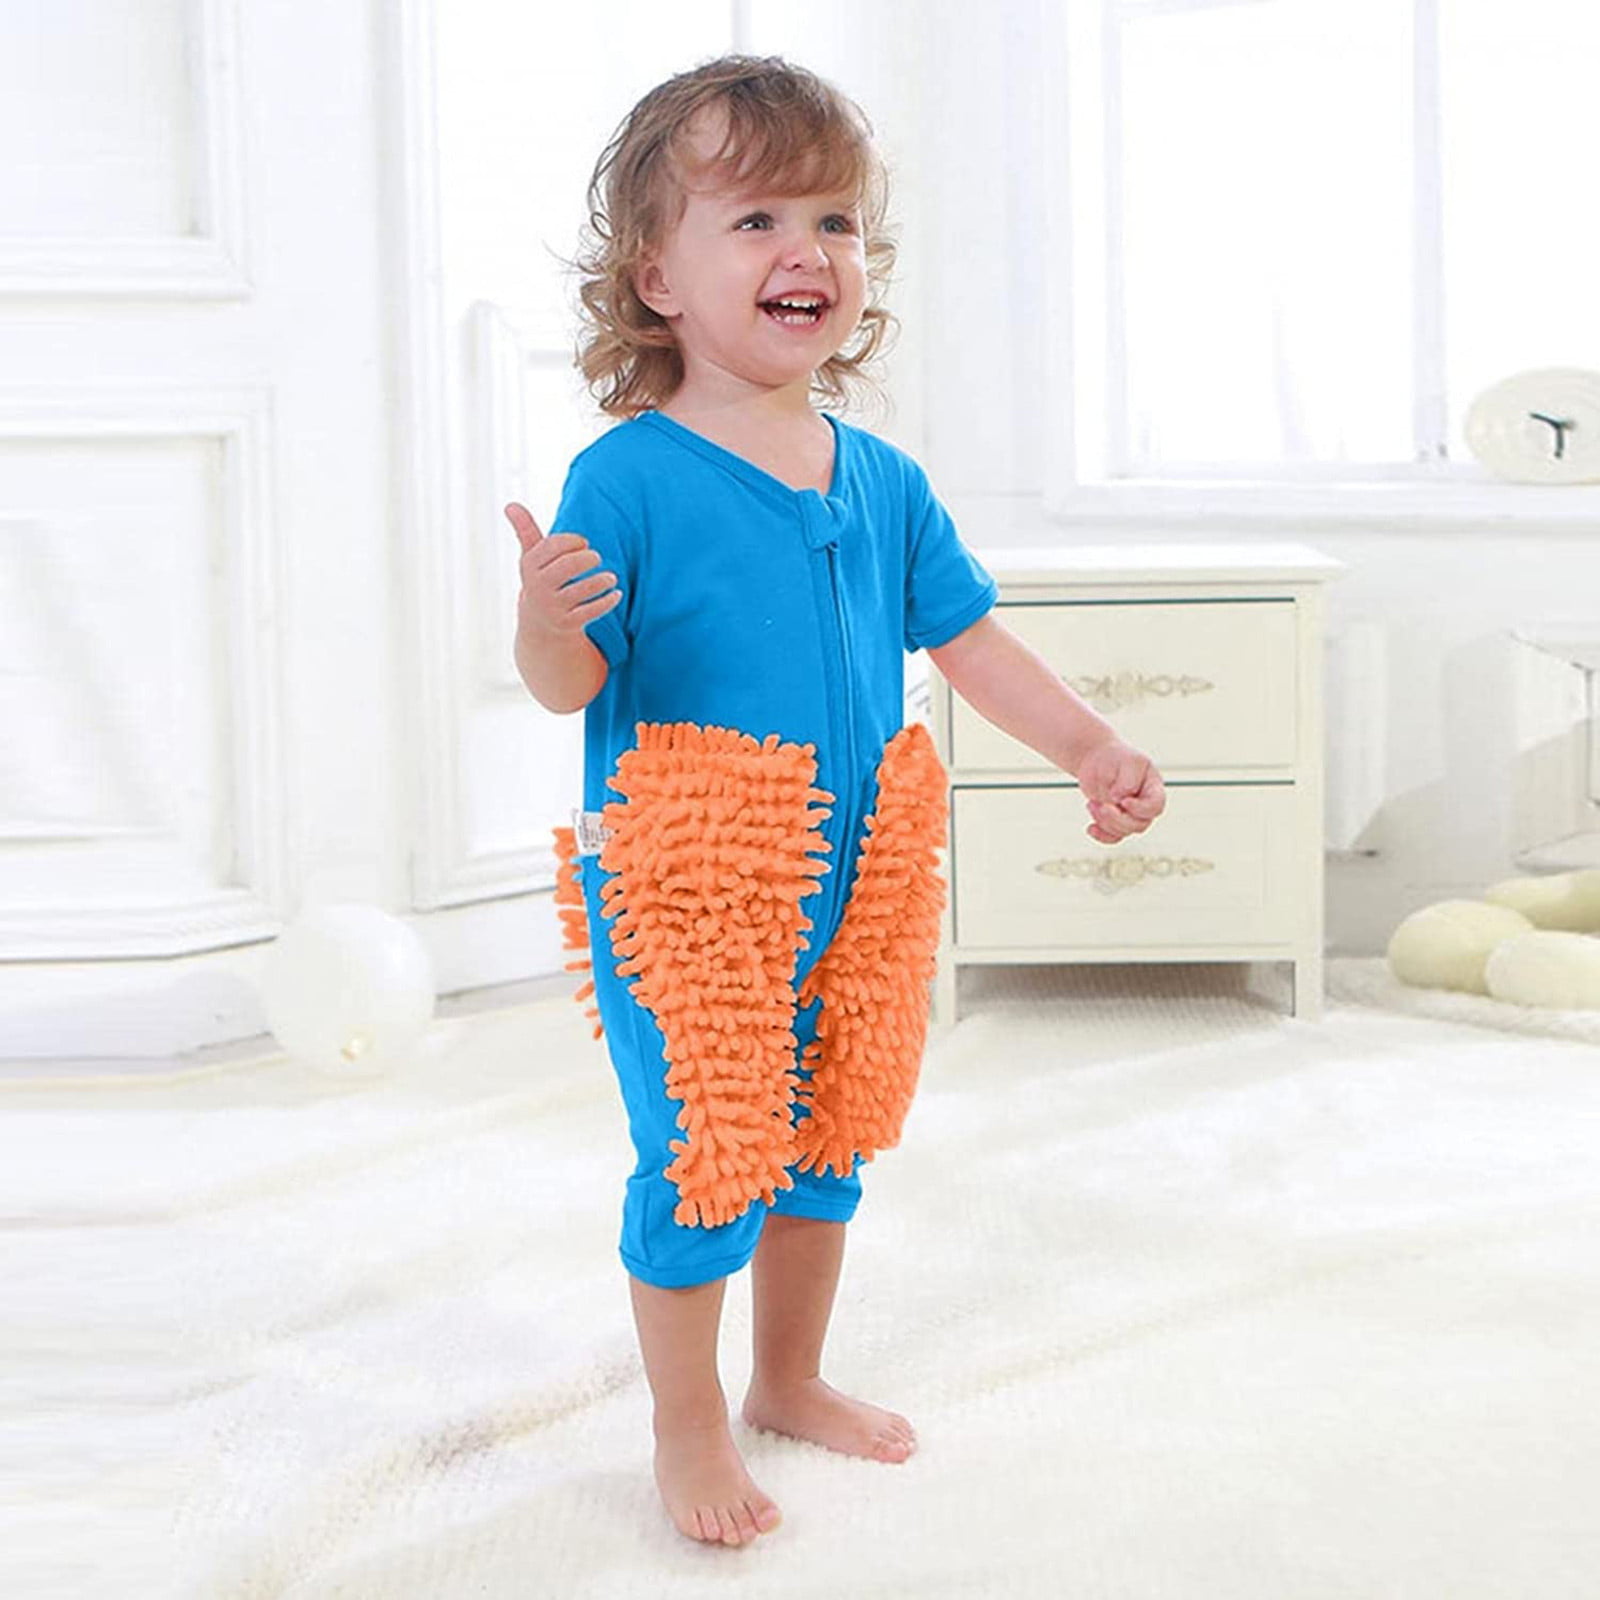 You Can Now Get a Baby Mop Onesie So Your Baby Can Help You Clean